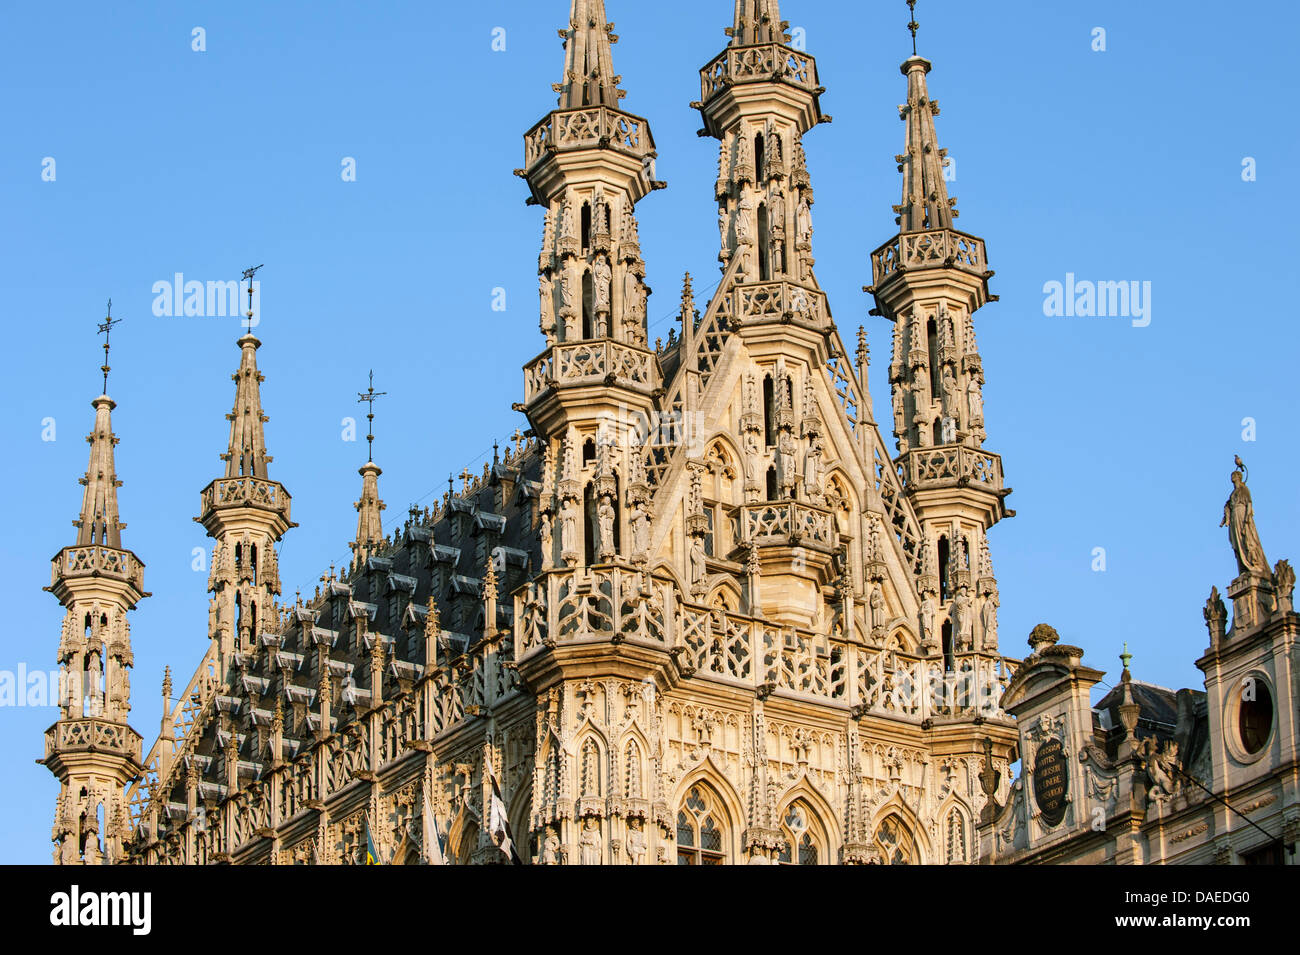 The Gothic town hall in Brabantine Late Gothic style at the Grote Markt / Main Market square, Leuven / Louvain, Belgium Stock Photo